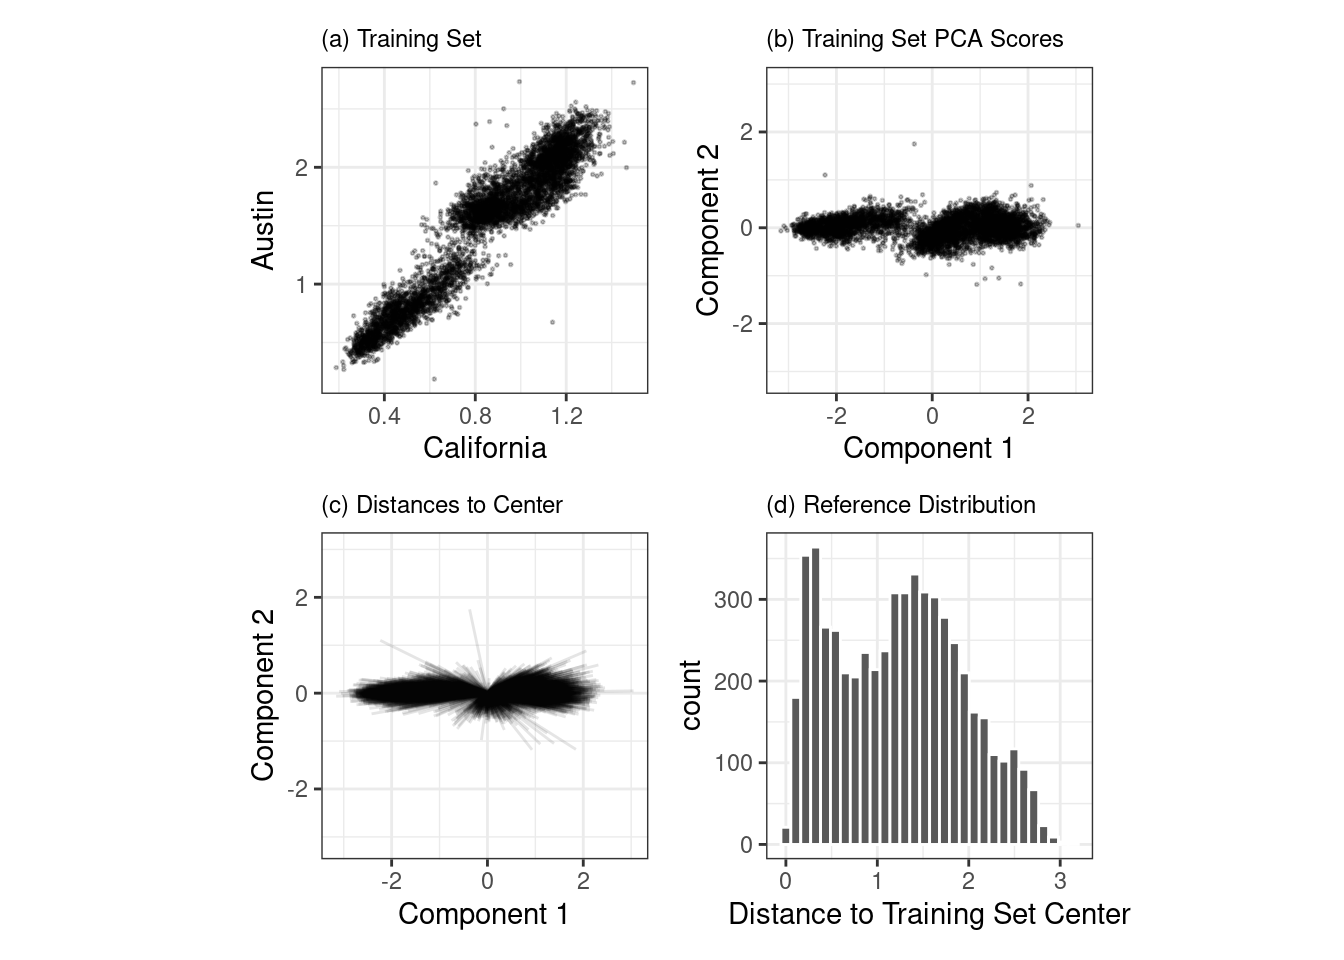 The PCA reference distribution based on the training set. The majority of the distances to the center of the PCA distribution are below a value of three.